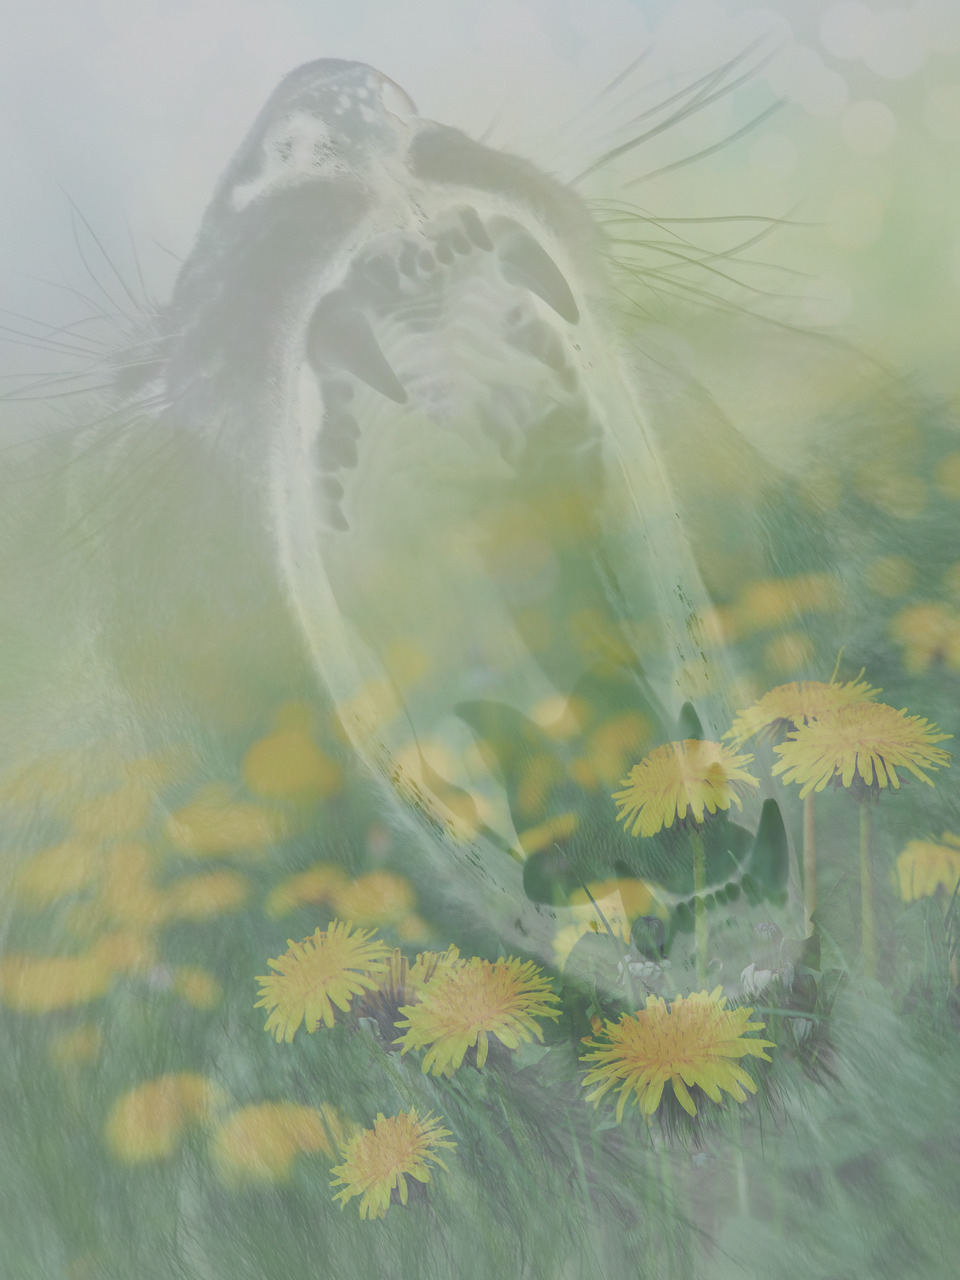 mouth of yawning lion imposed over field of yellow dandelions